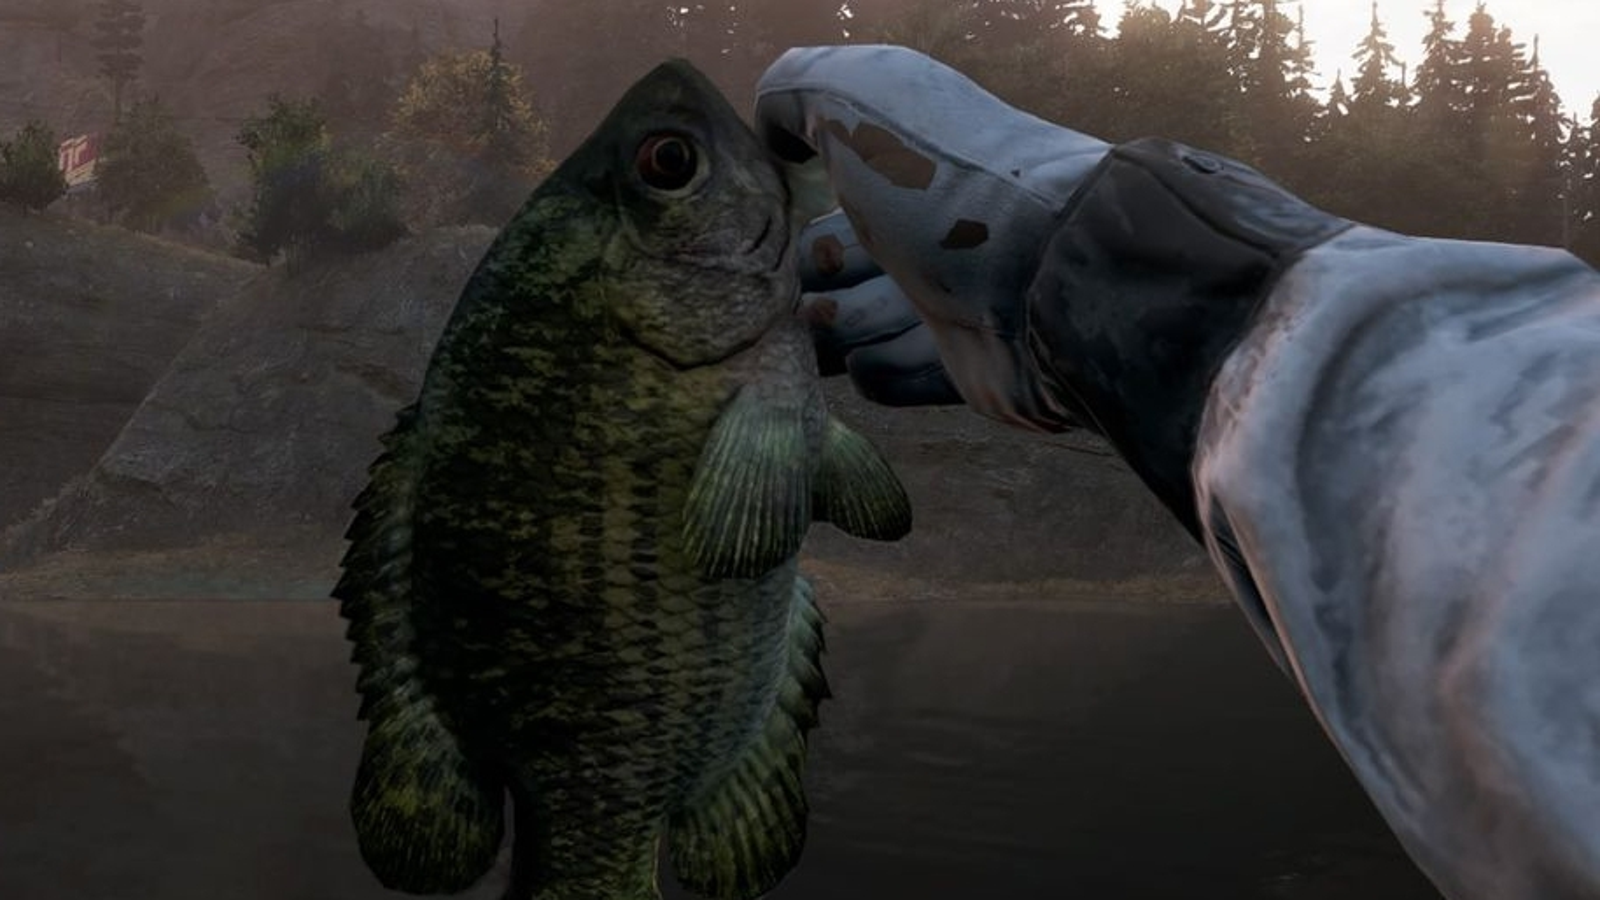 Time To Fish! Buy The Best Fishing Games Here!